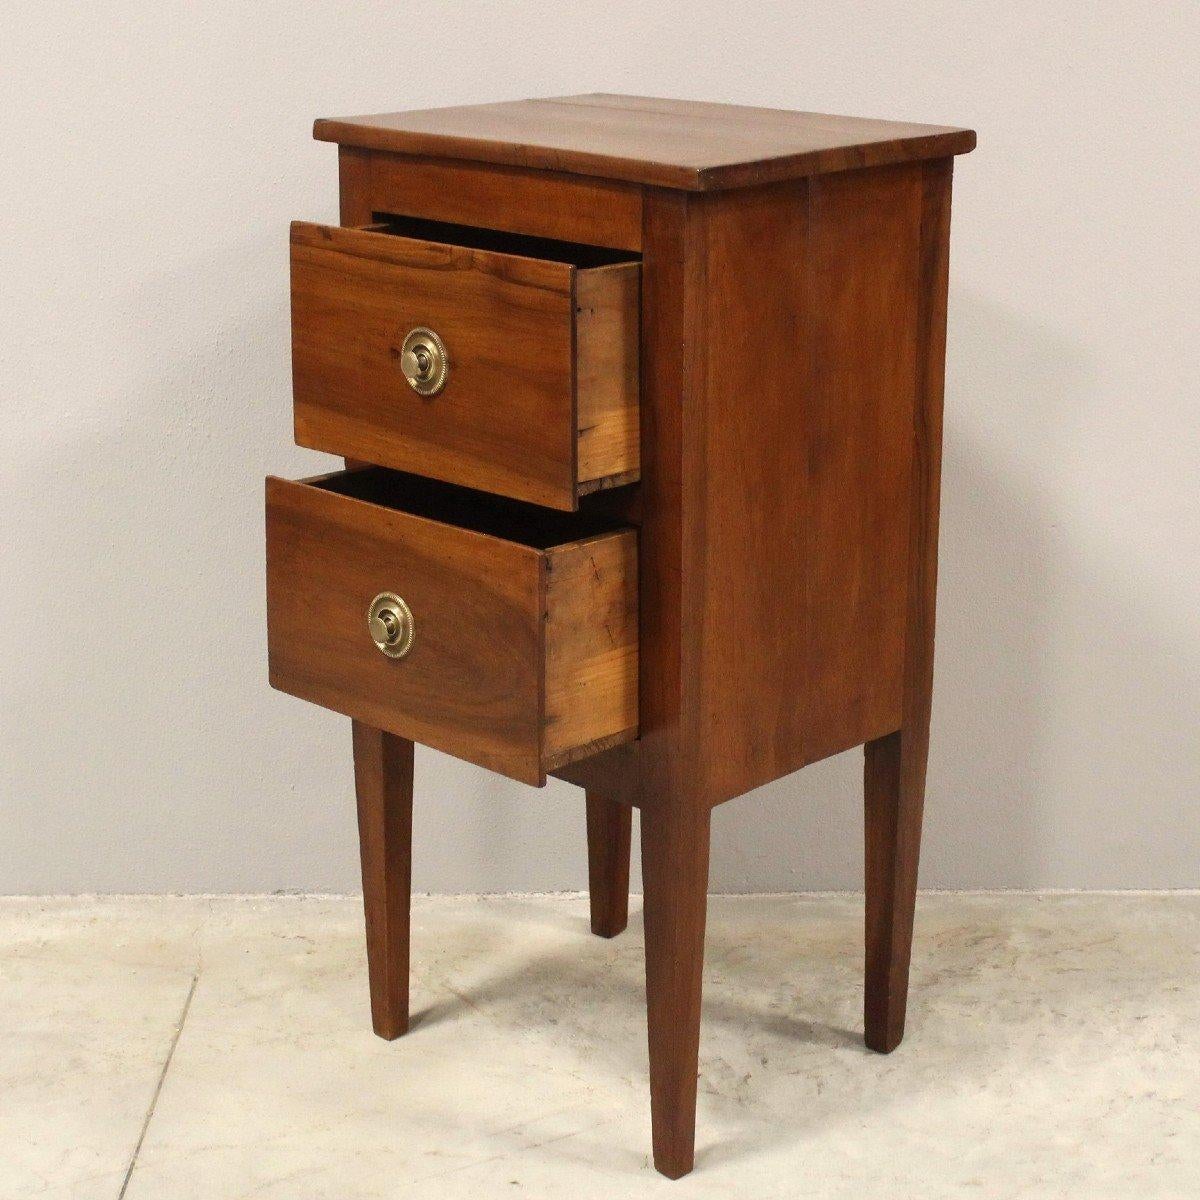 18th Century Italian Walnut Bedside Table with Two Drawers and Tapered Legs 1